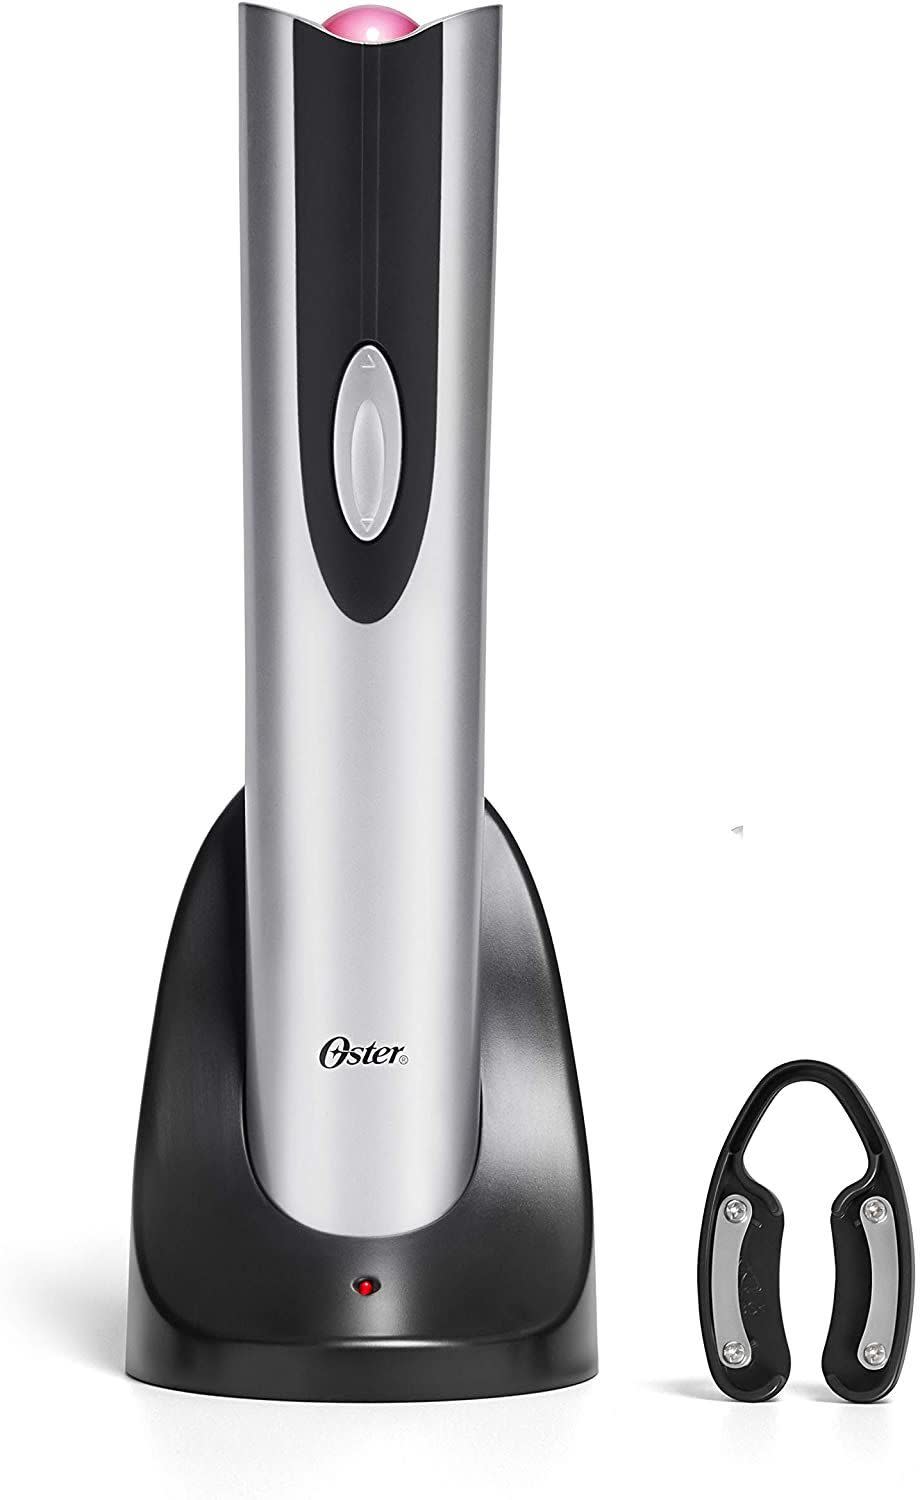 4) Oster Cordless Electric Wine Opener